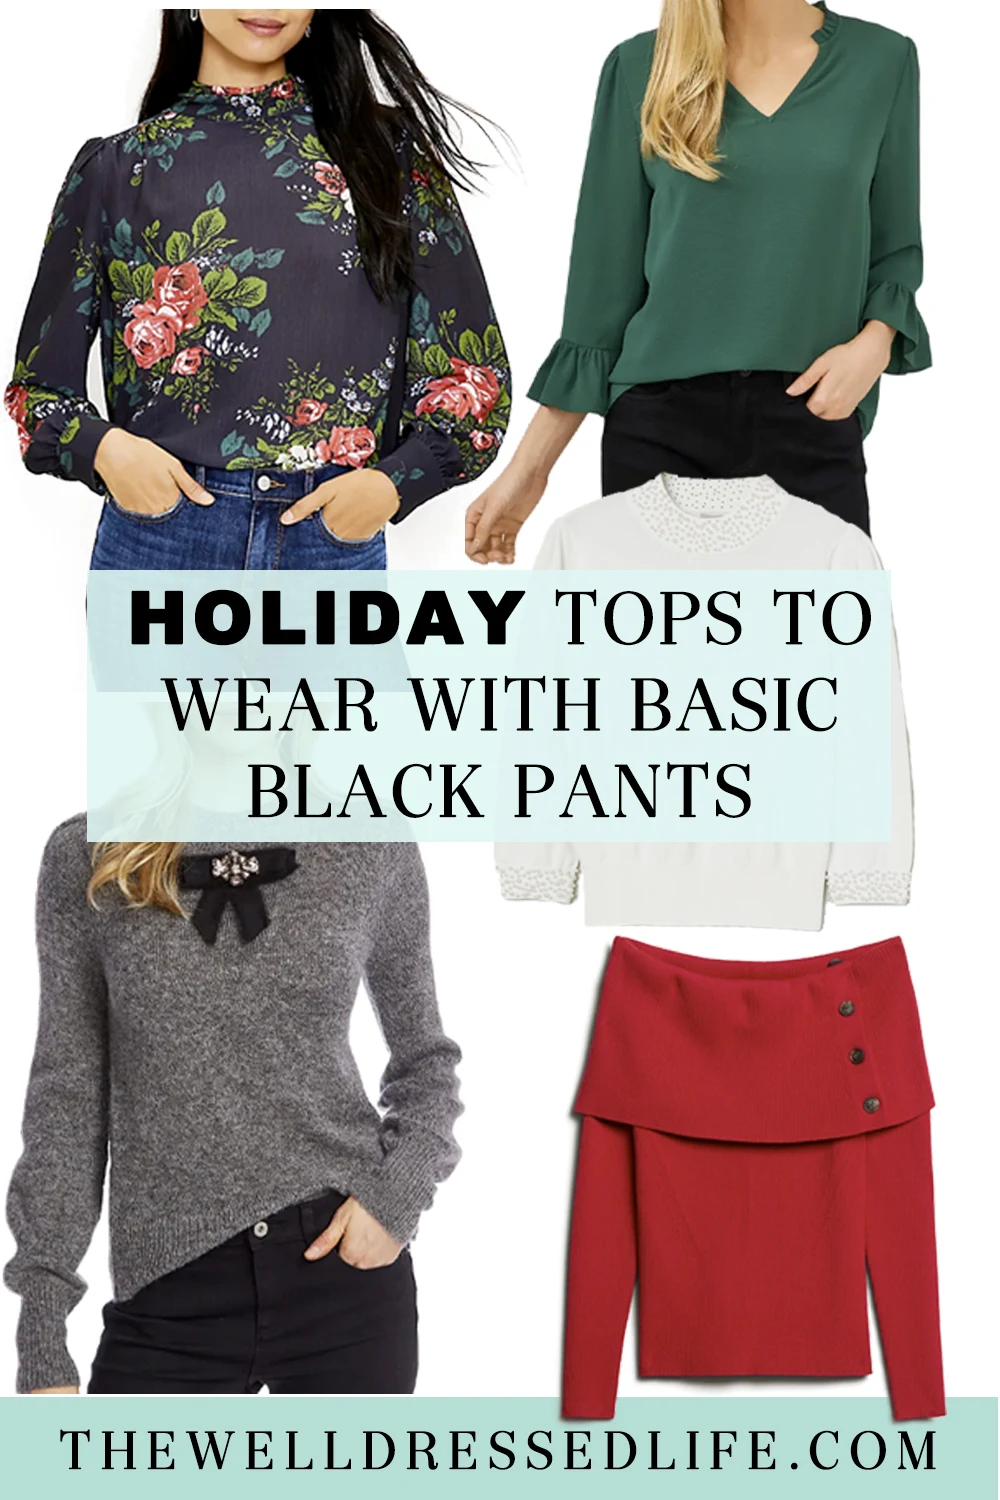 Holiday Tops to Wear with Basic Black Pants